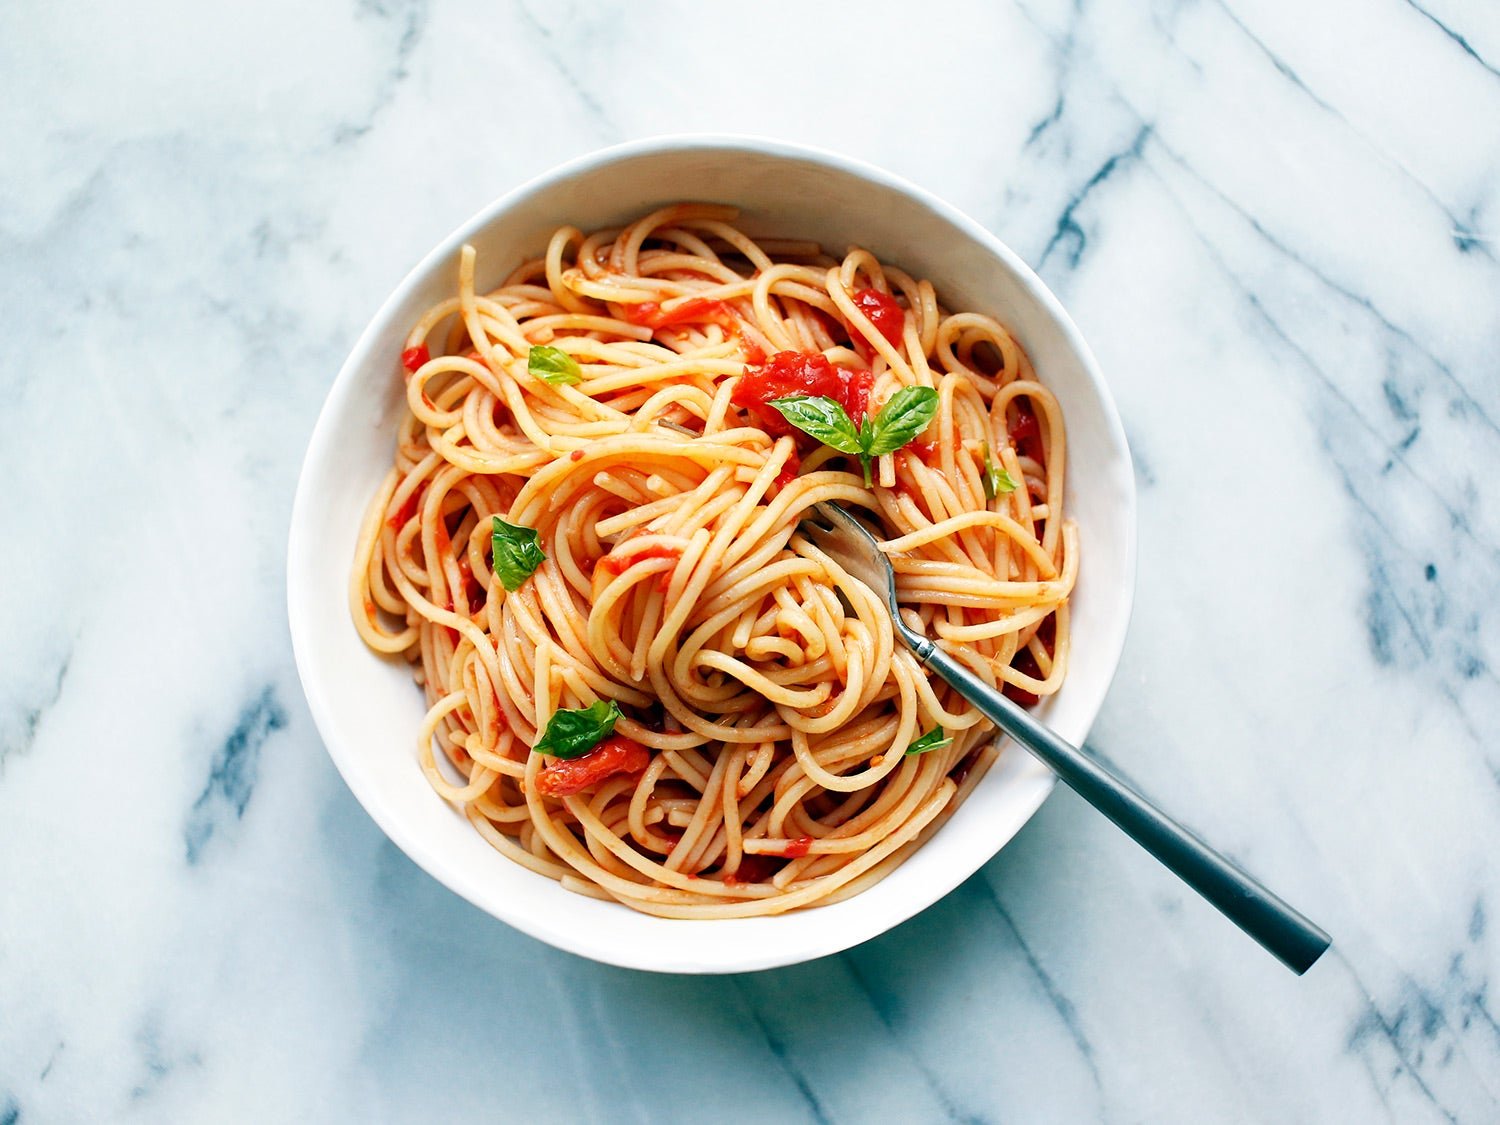 47 Essential Pasta Recipes for Olive-Oiled, Red-Sauced Happiness